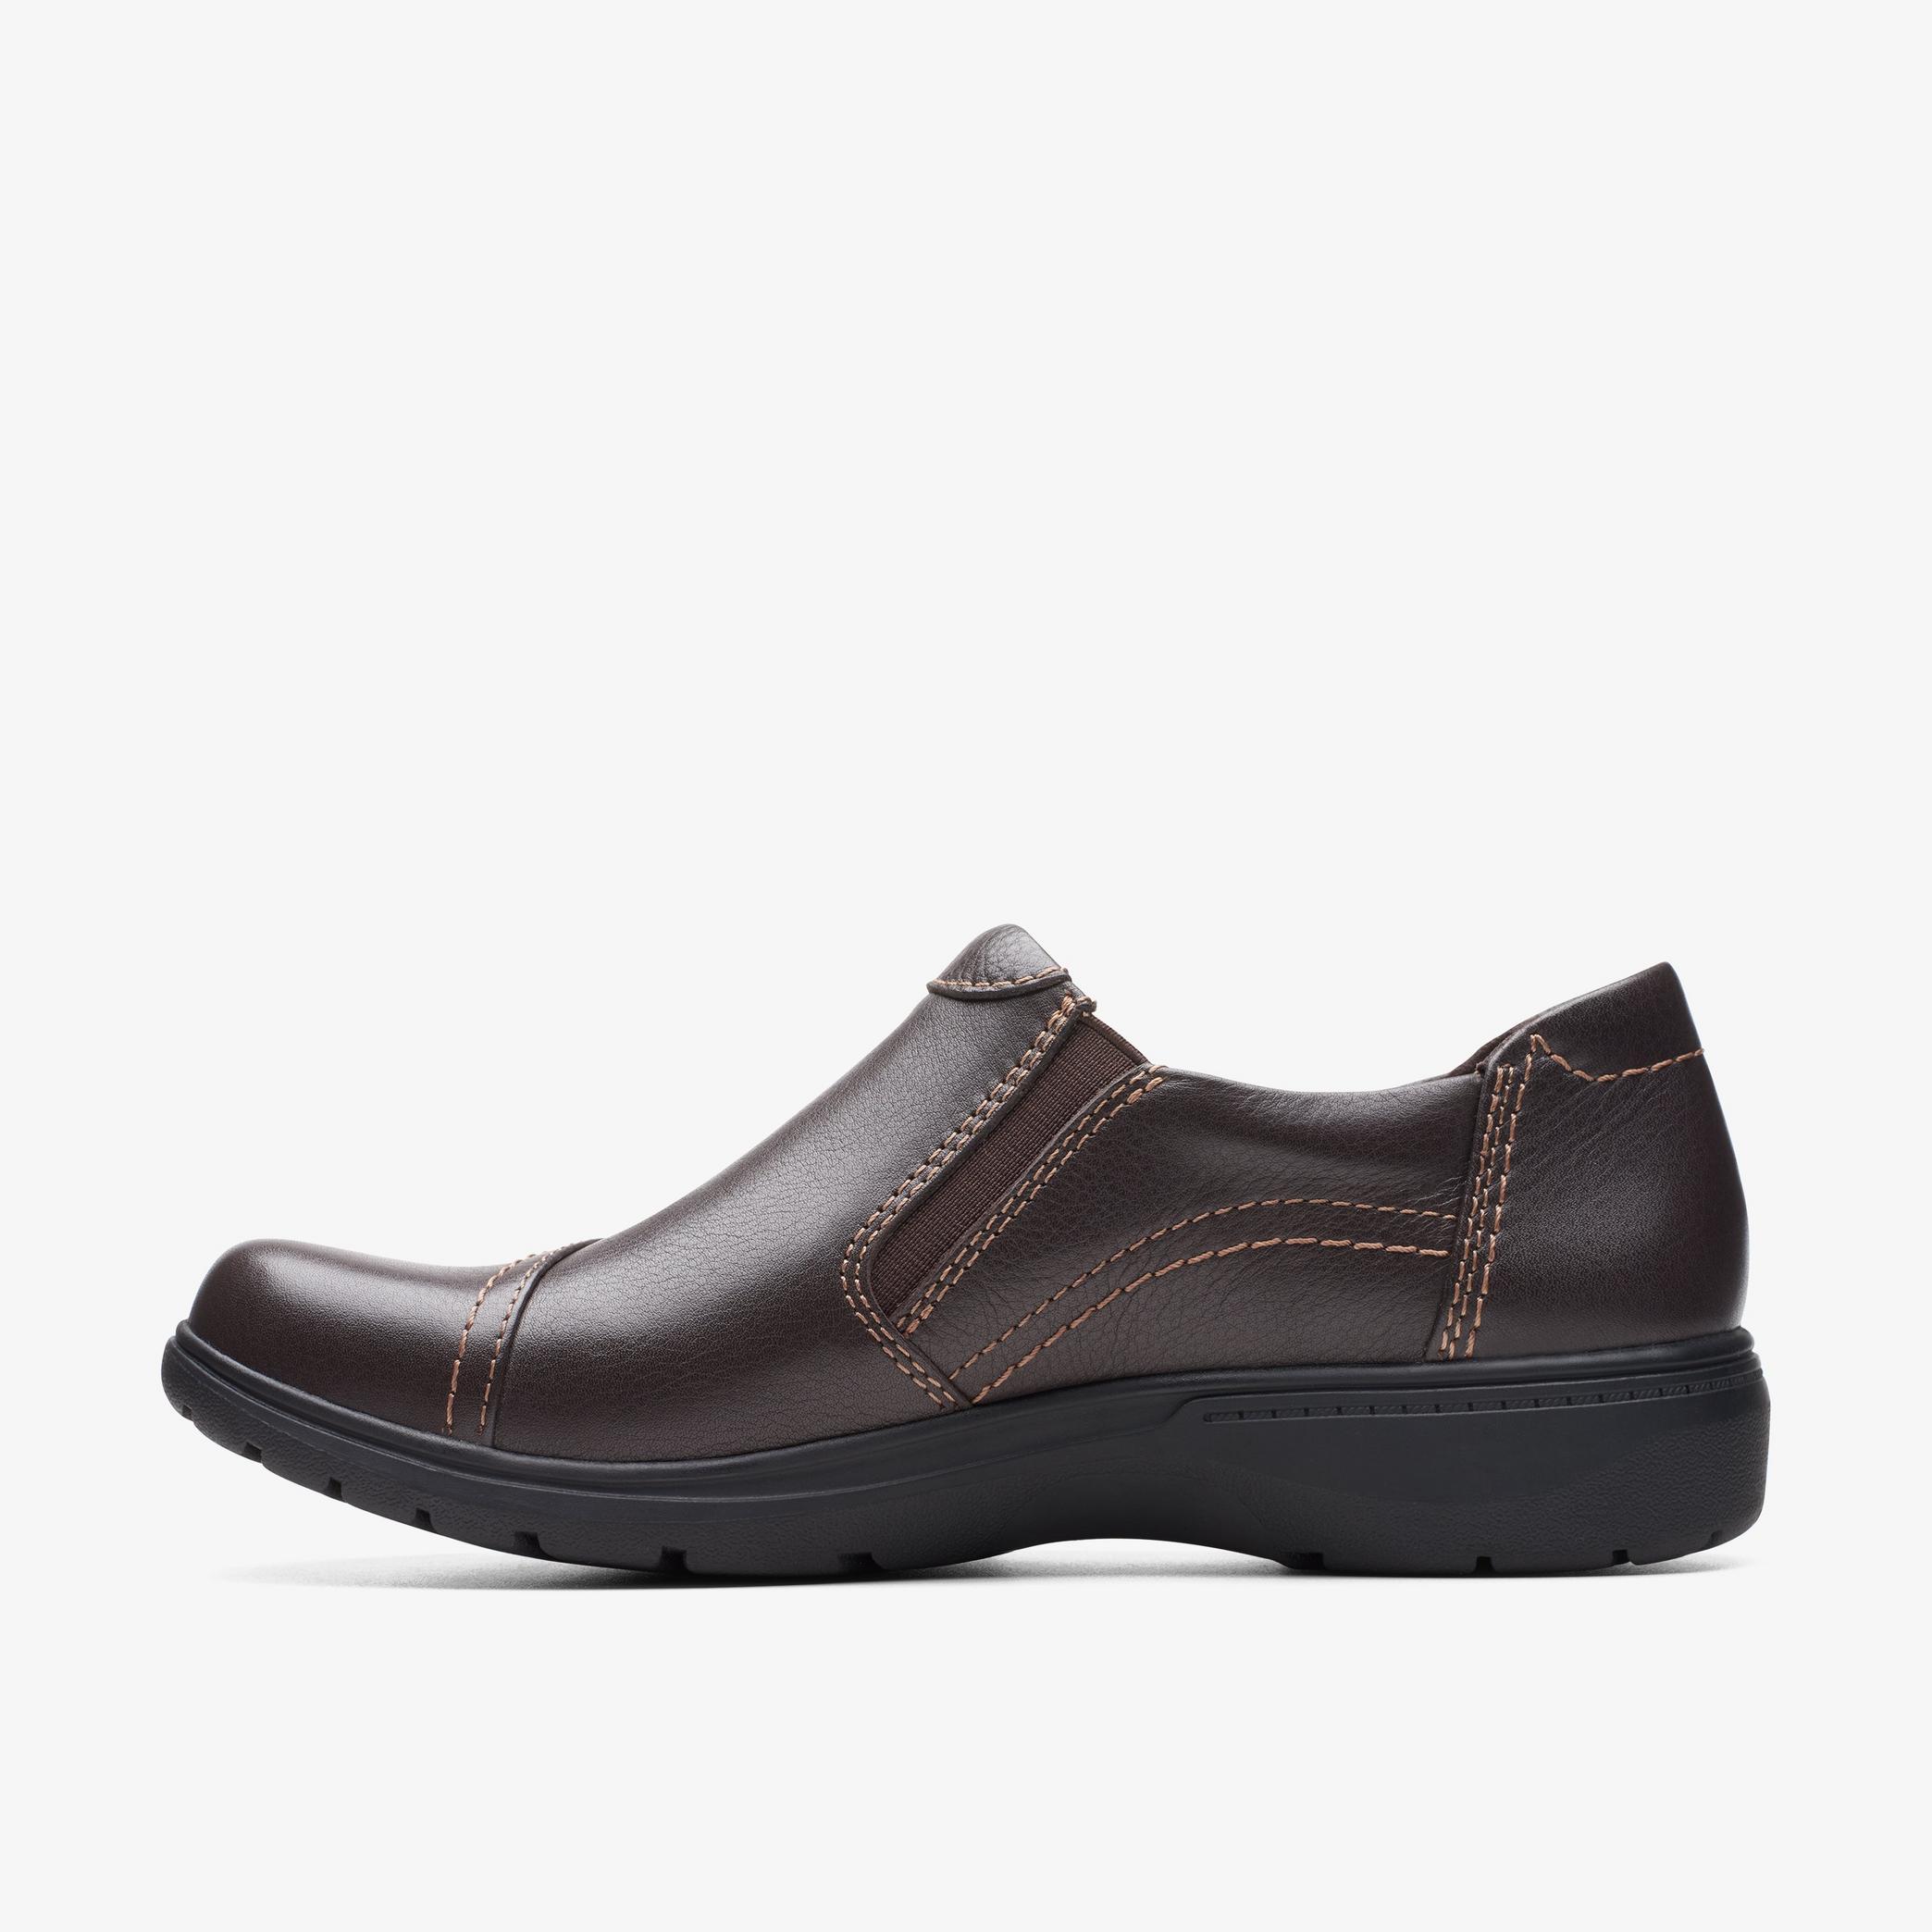 Carleigh Ray Dark Brown Leather Slip Ons, view 2 of 6